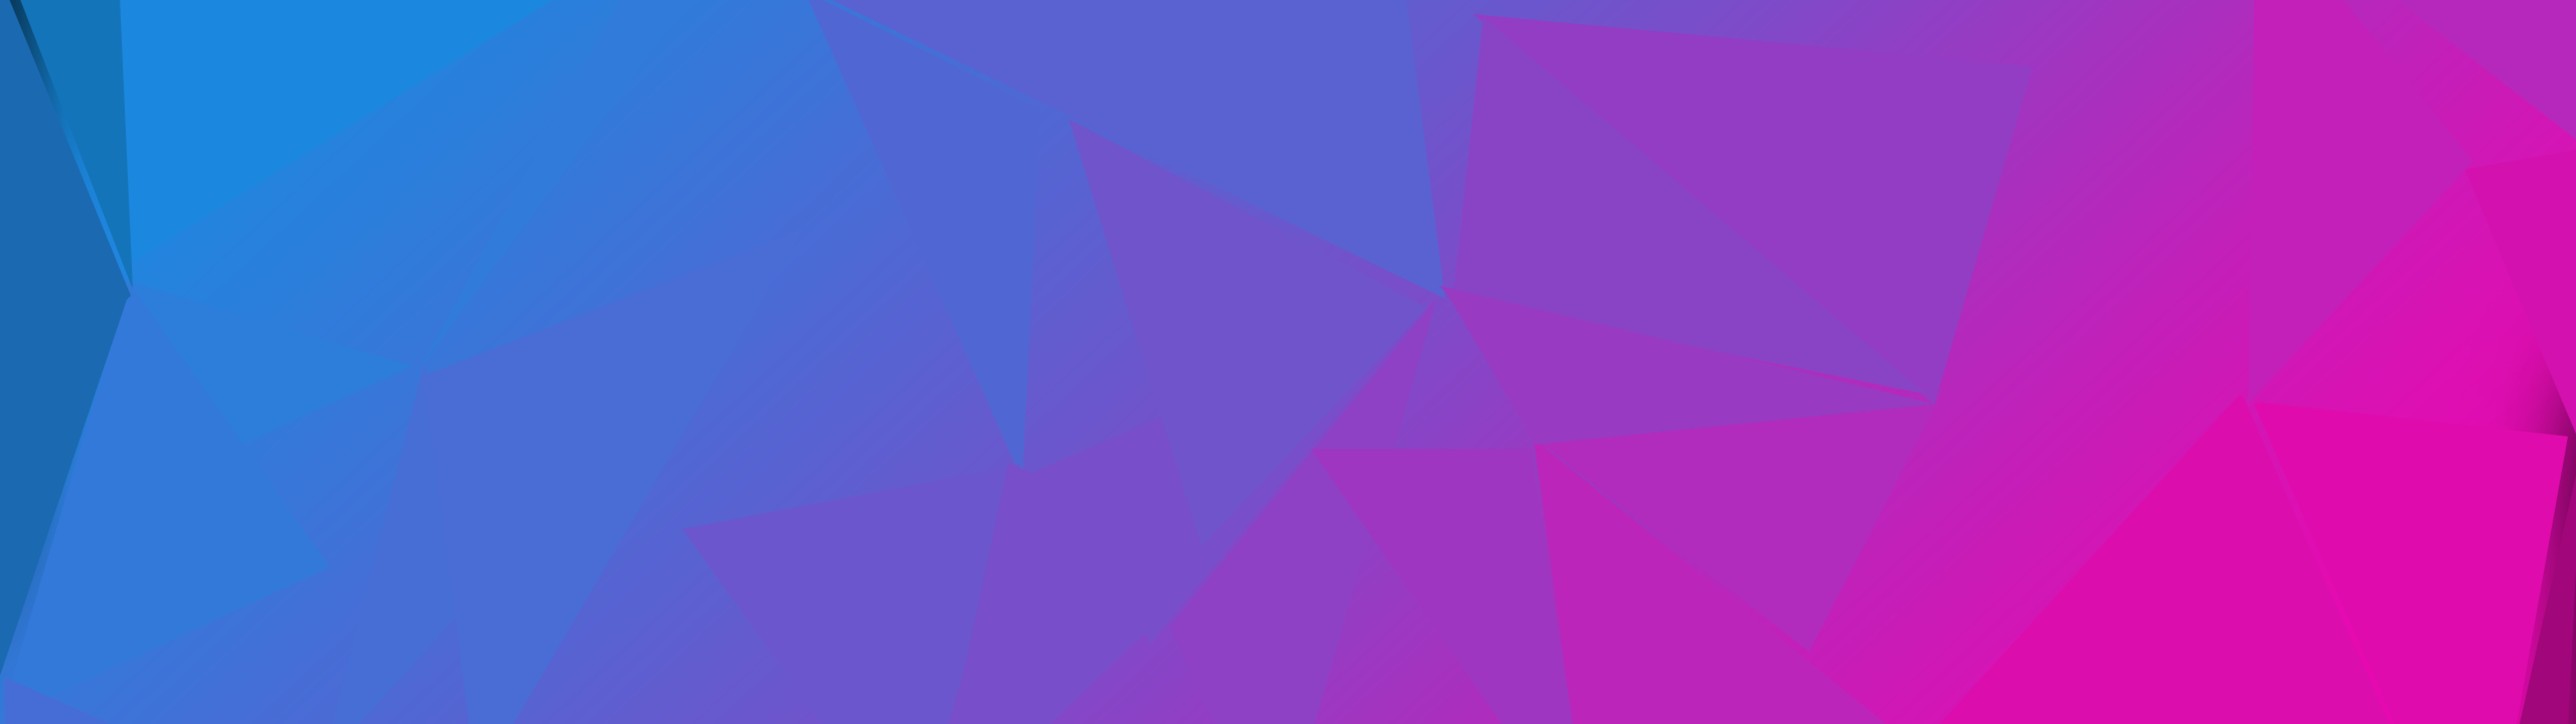 5120x1440 Resolution Gradient Triangle Colors 5120x1440 Resolution